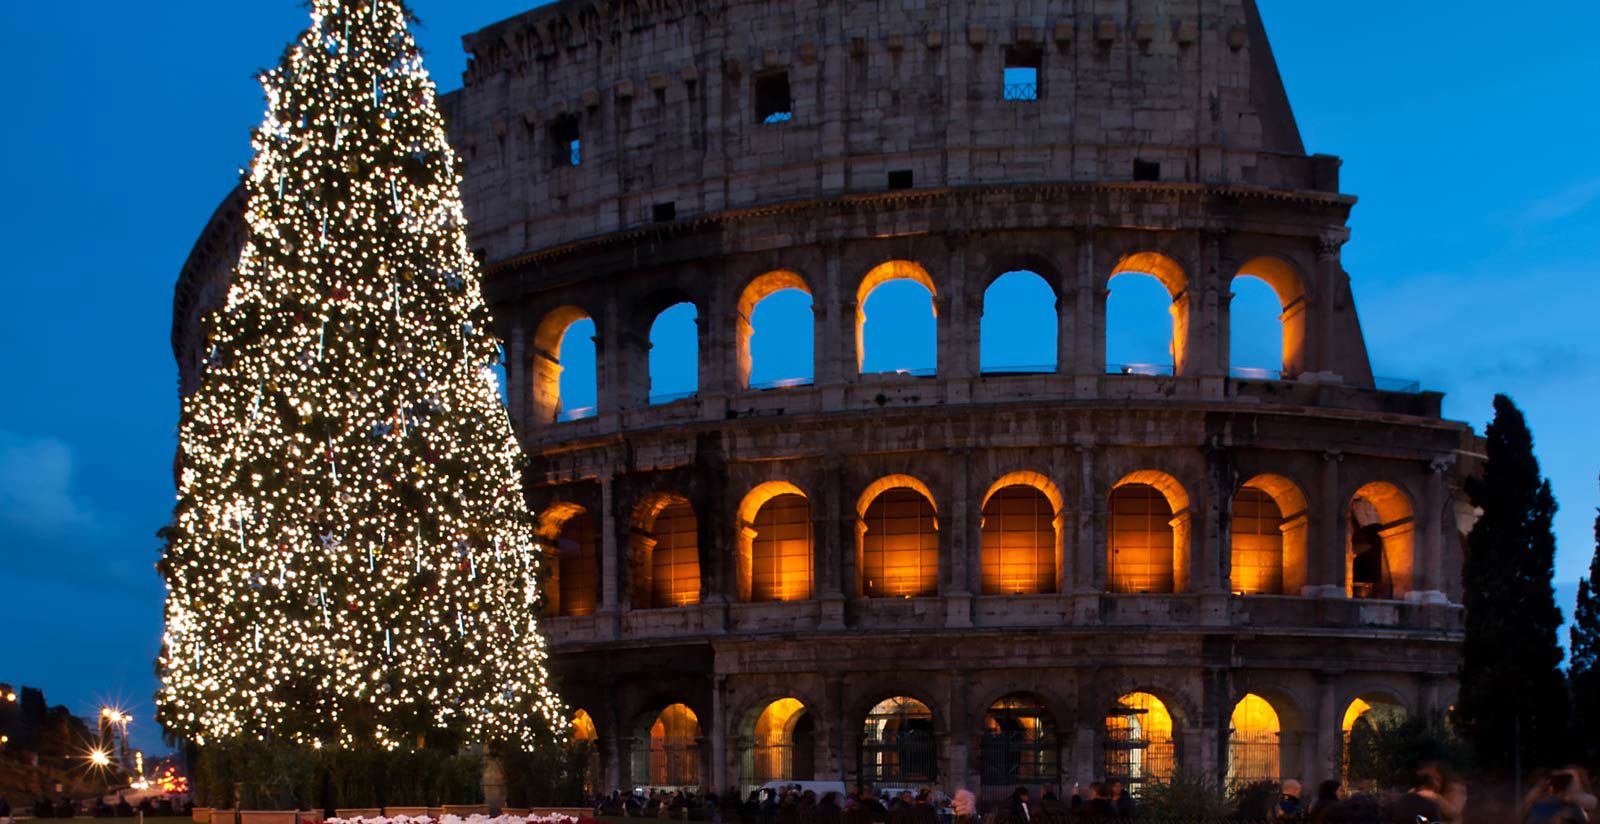 FH55 Hotels - Hotel in Rome for New Year: offers in a 4-star hotel 1